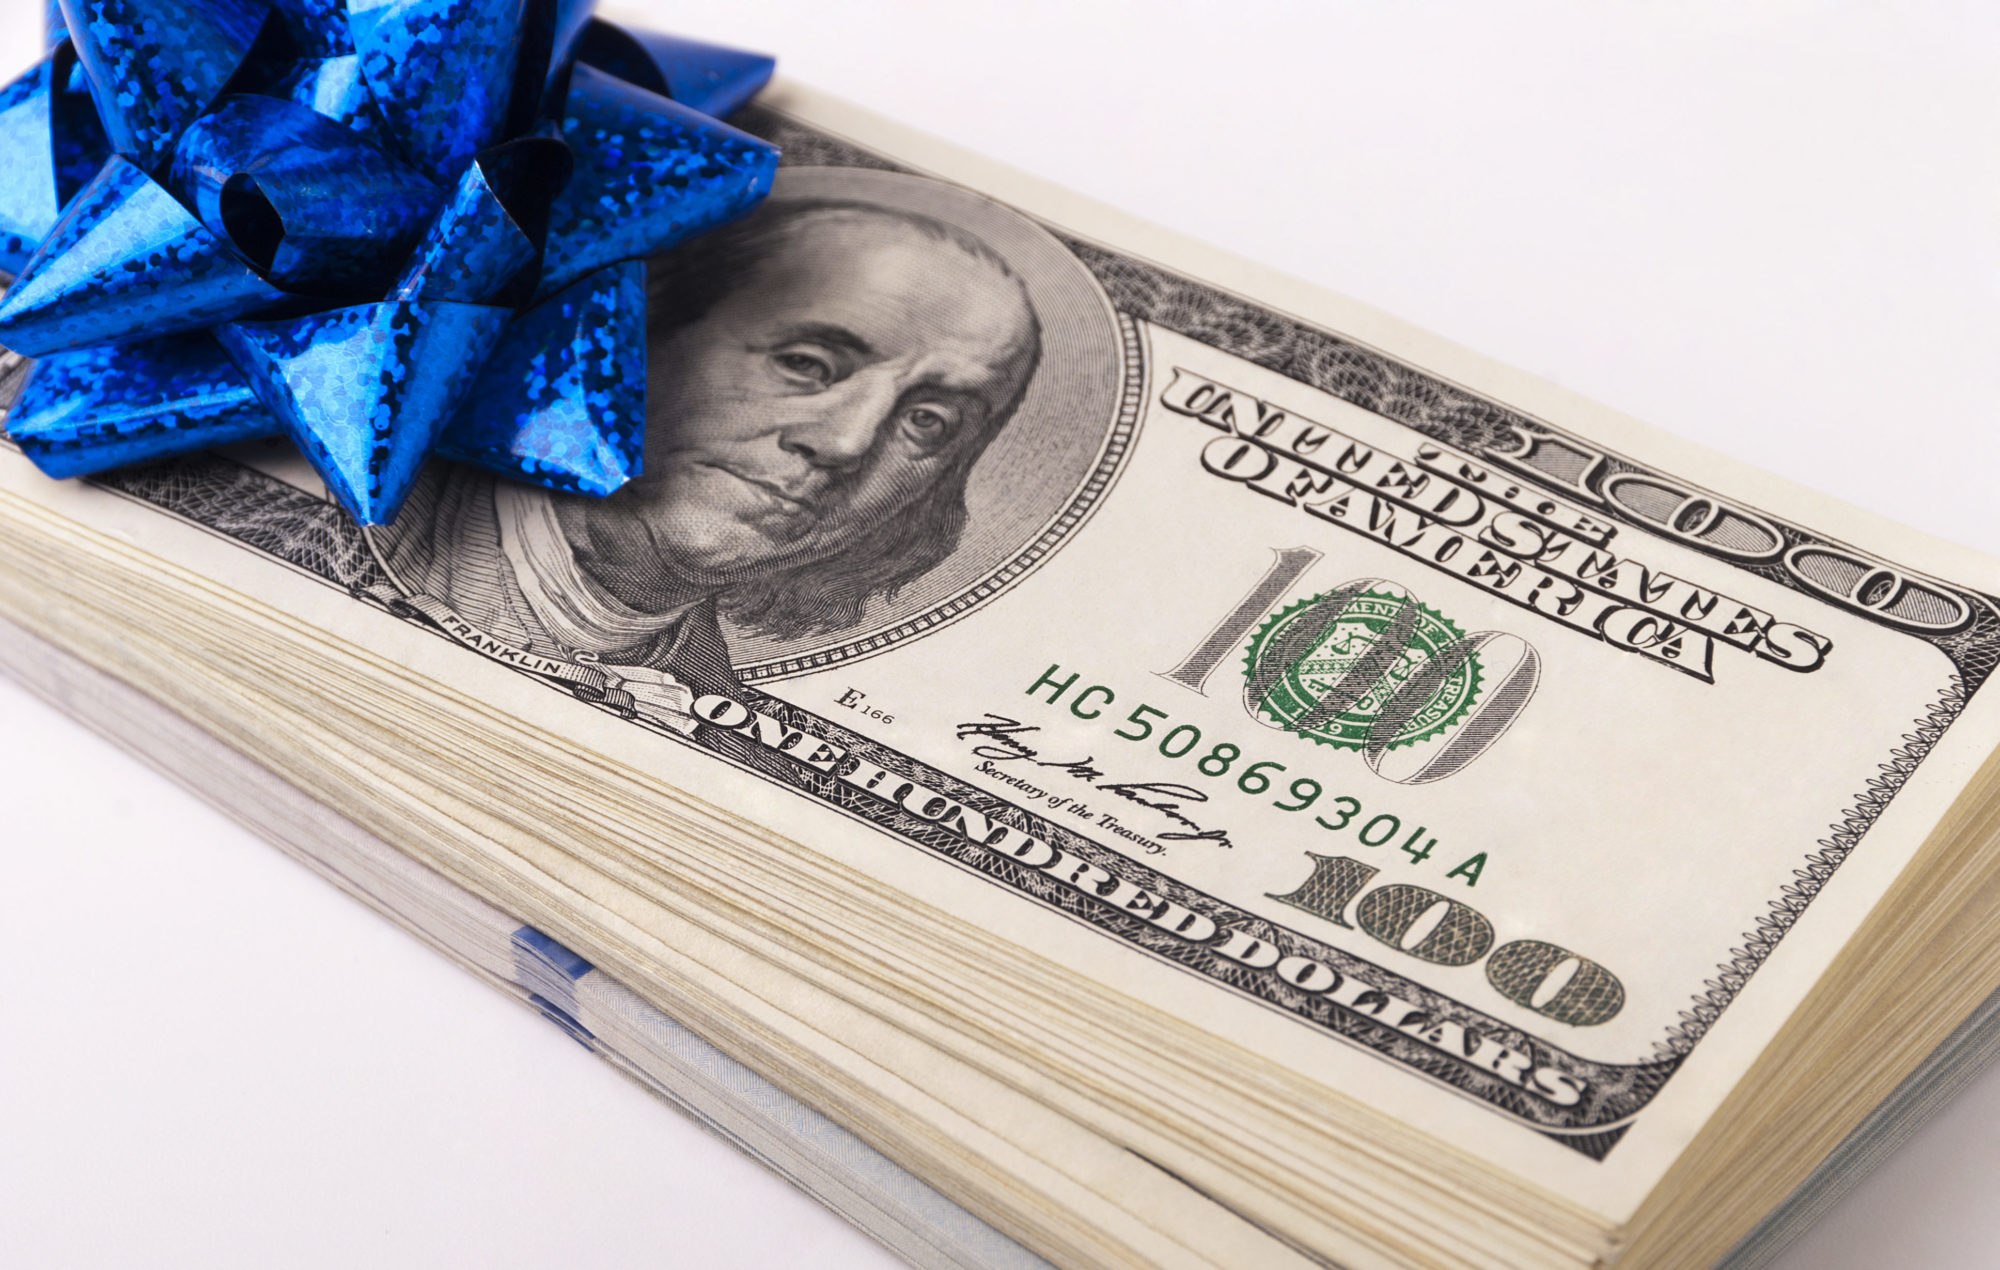 Take Advantage of the Gift Tax Exclusion Rules